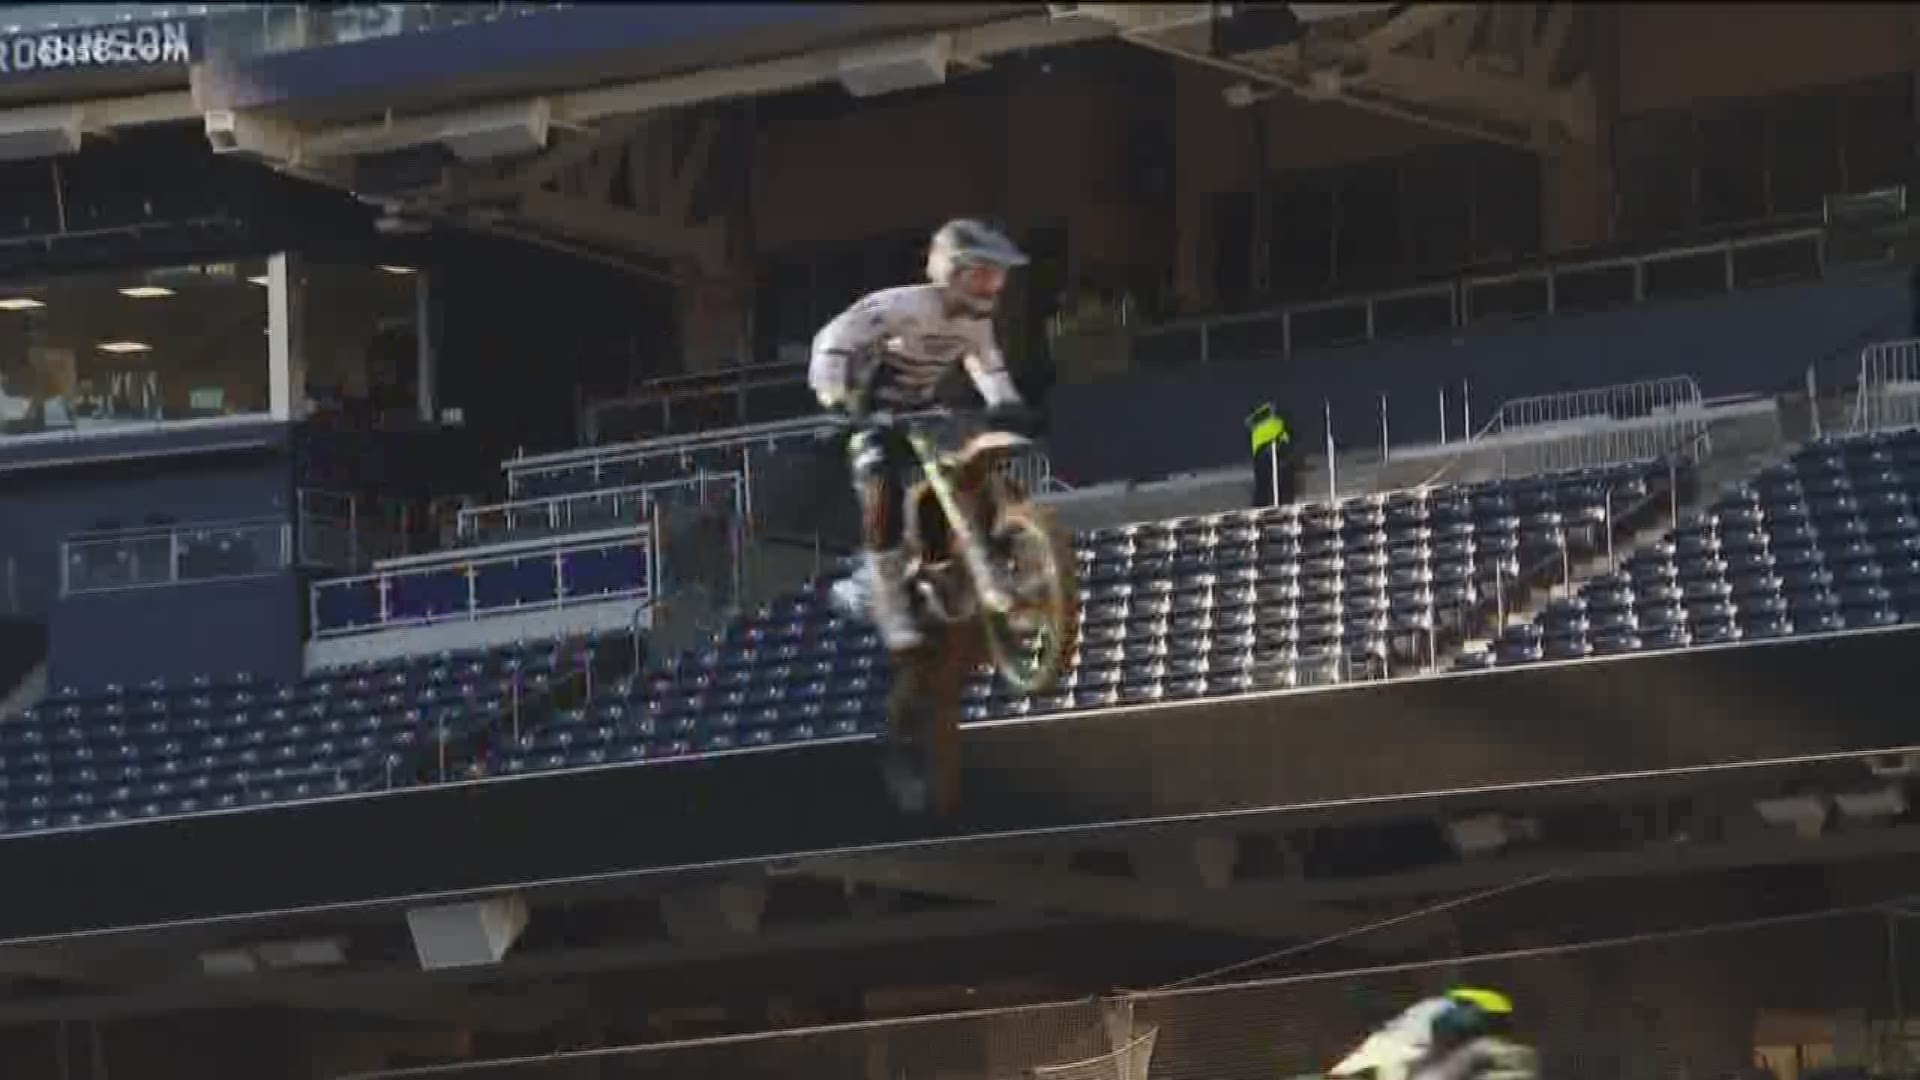 This is the sixth year in a row for Supercross at Petco Park after moving from Qualcomm Stadium....or as we now call it, SDCCU Stadium.